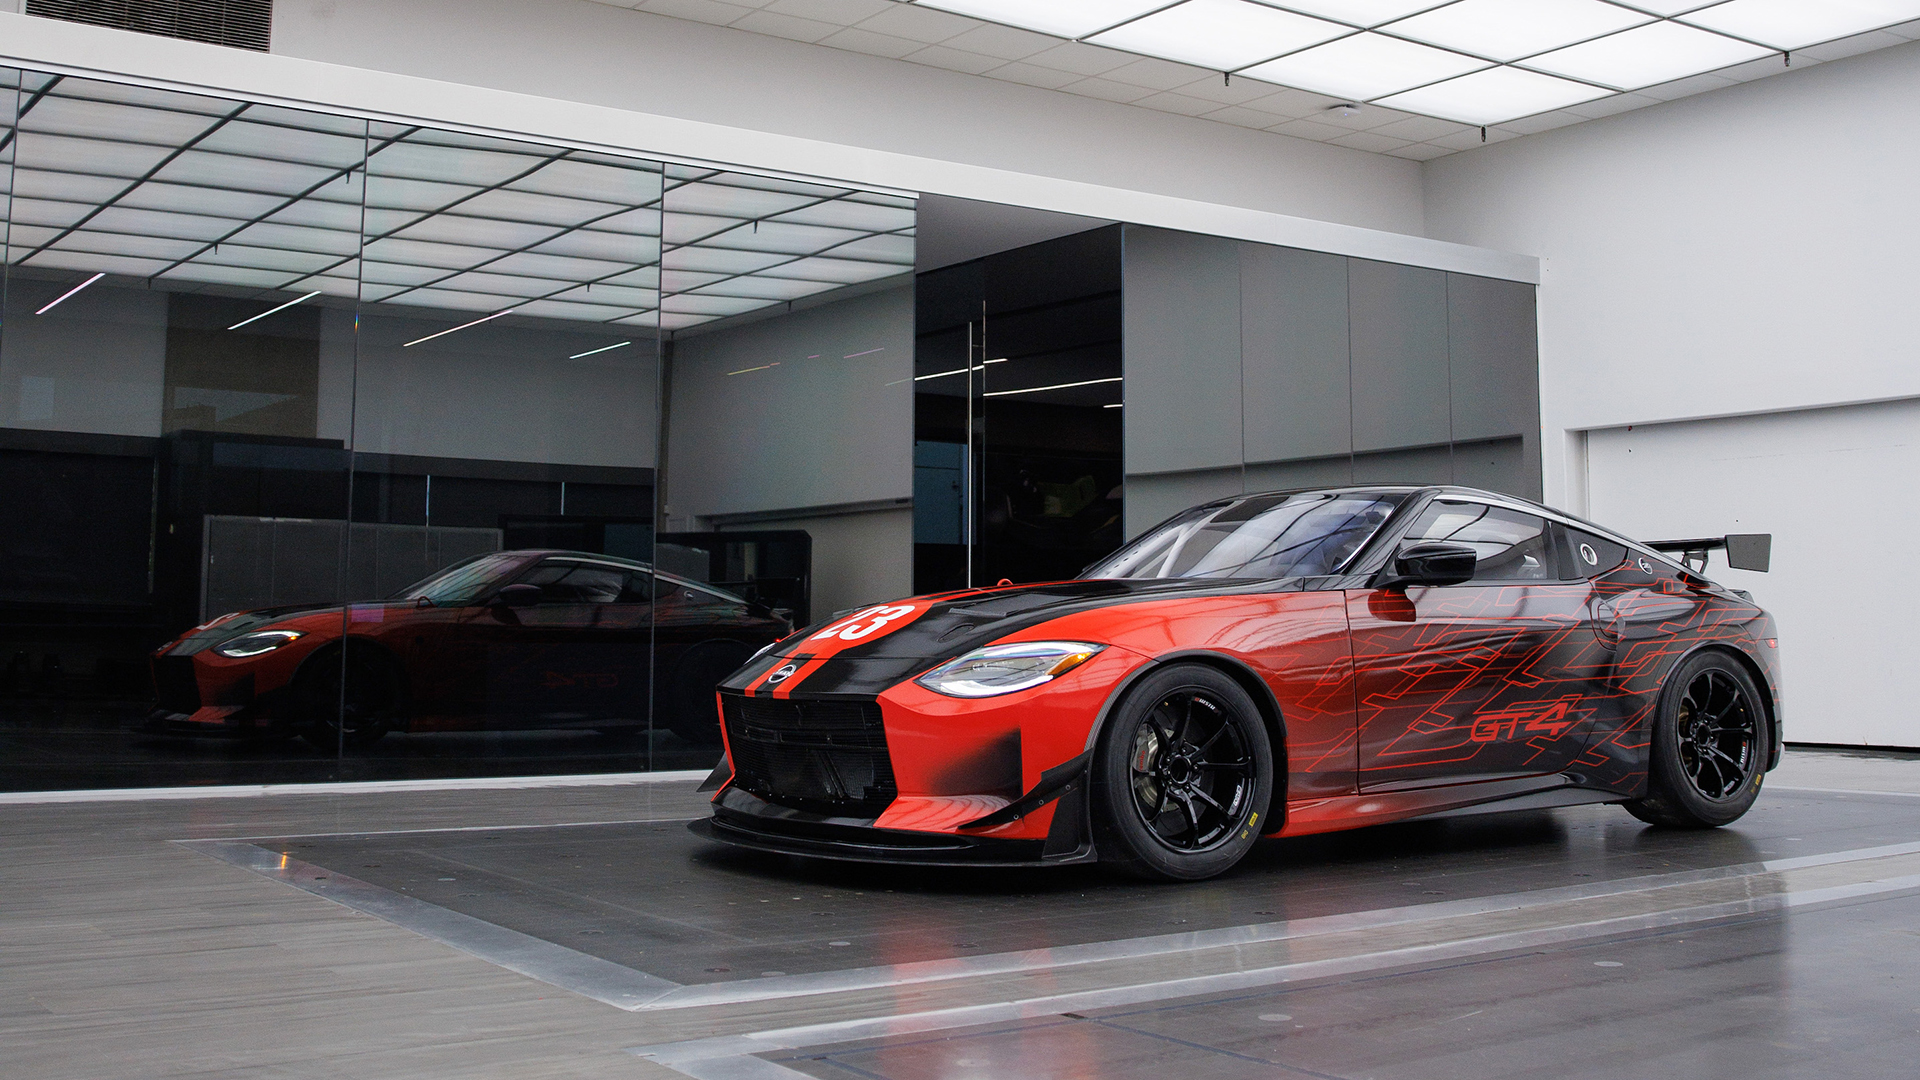 The Nissan Z GT4 Race Car Is Here With 450 HP and It Looks Sick